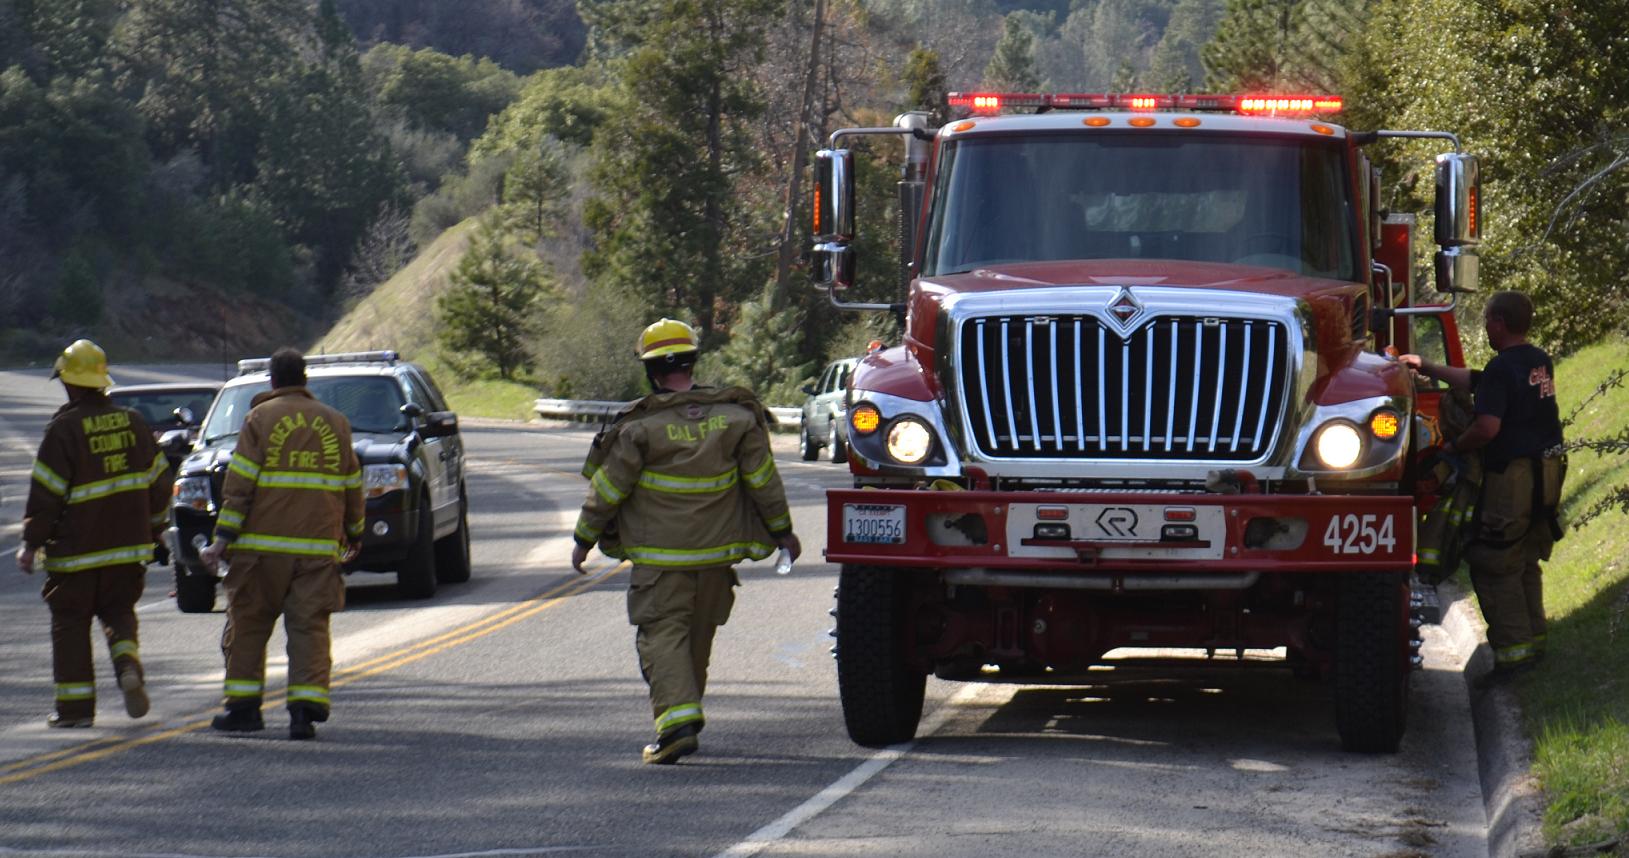 Firefighters return to quarters - photo by Gina Clugston